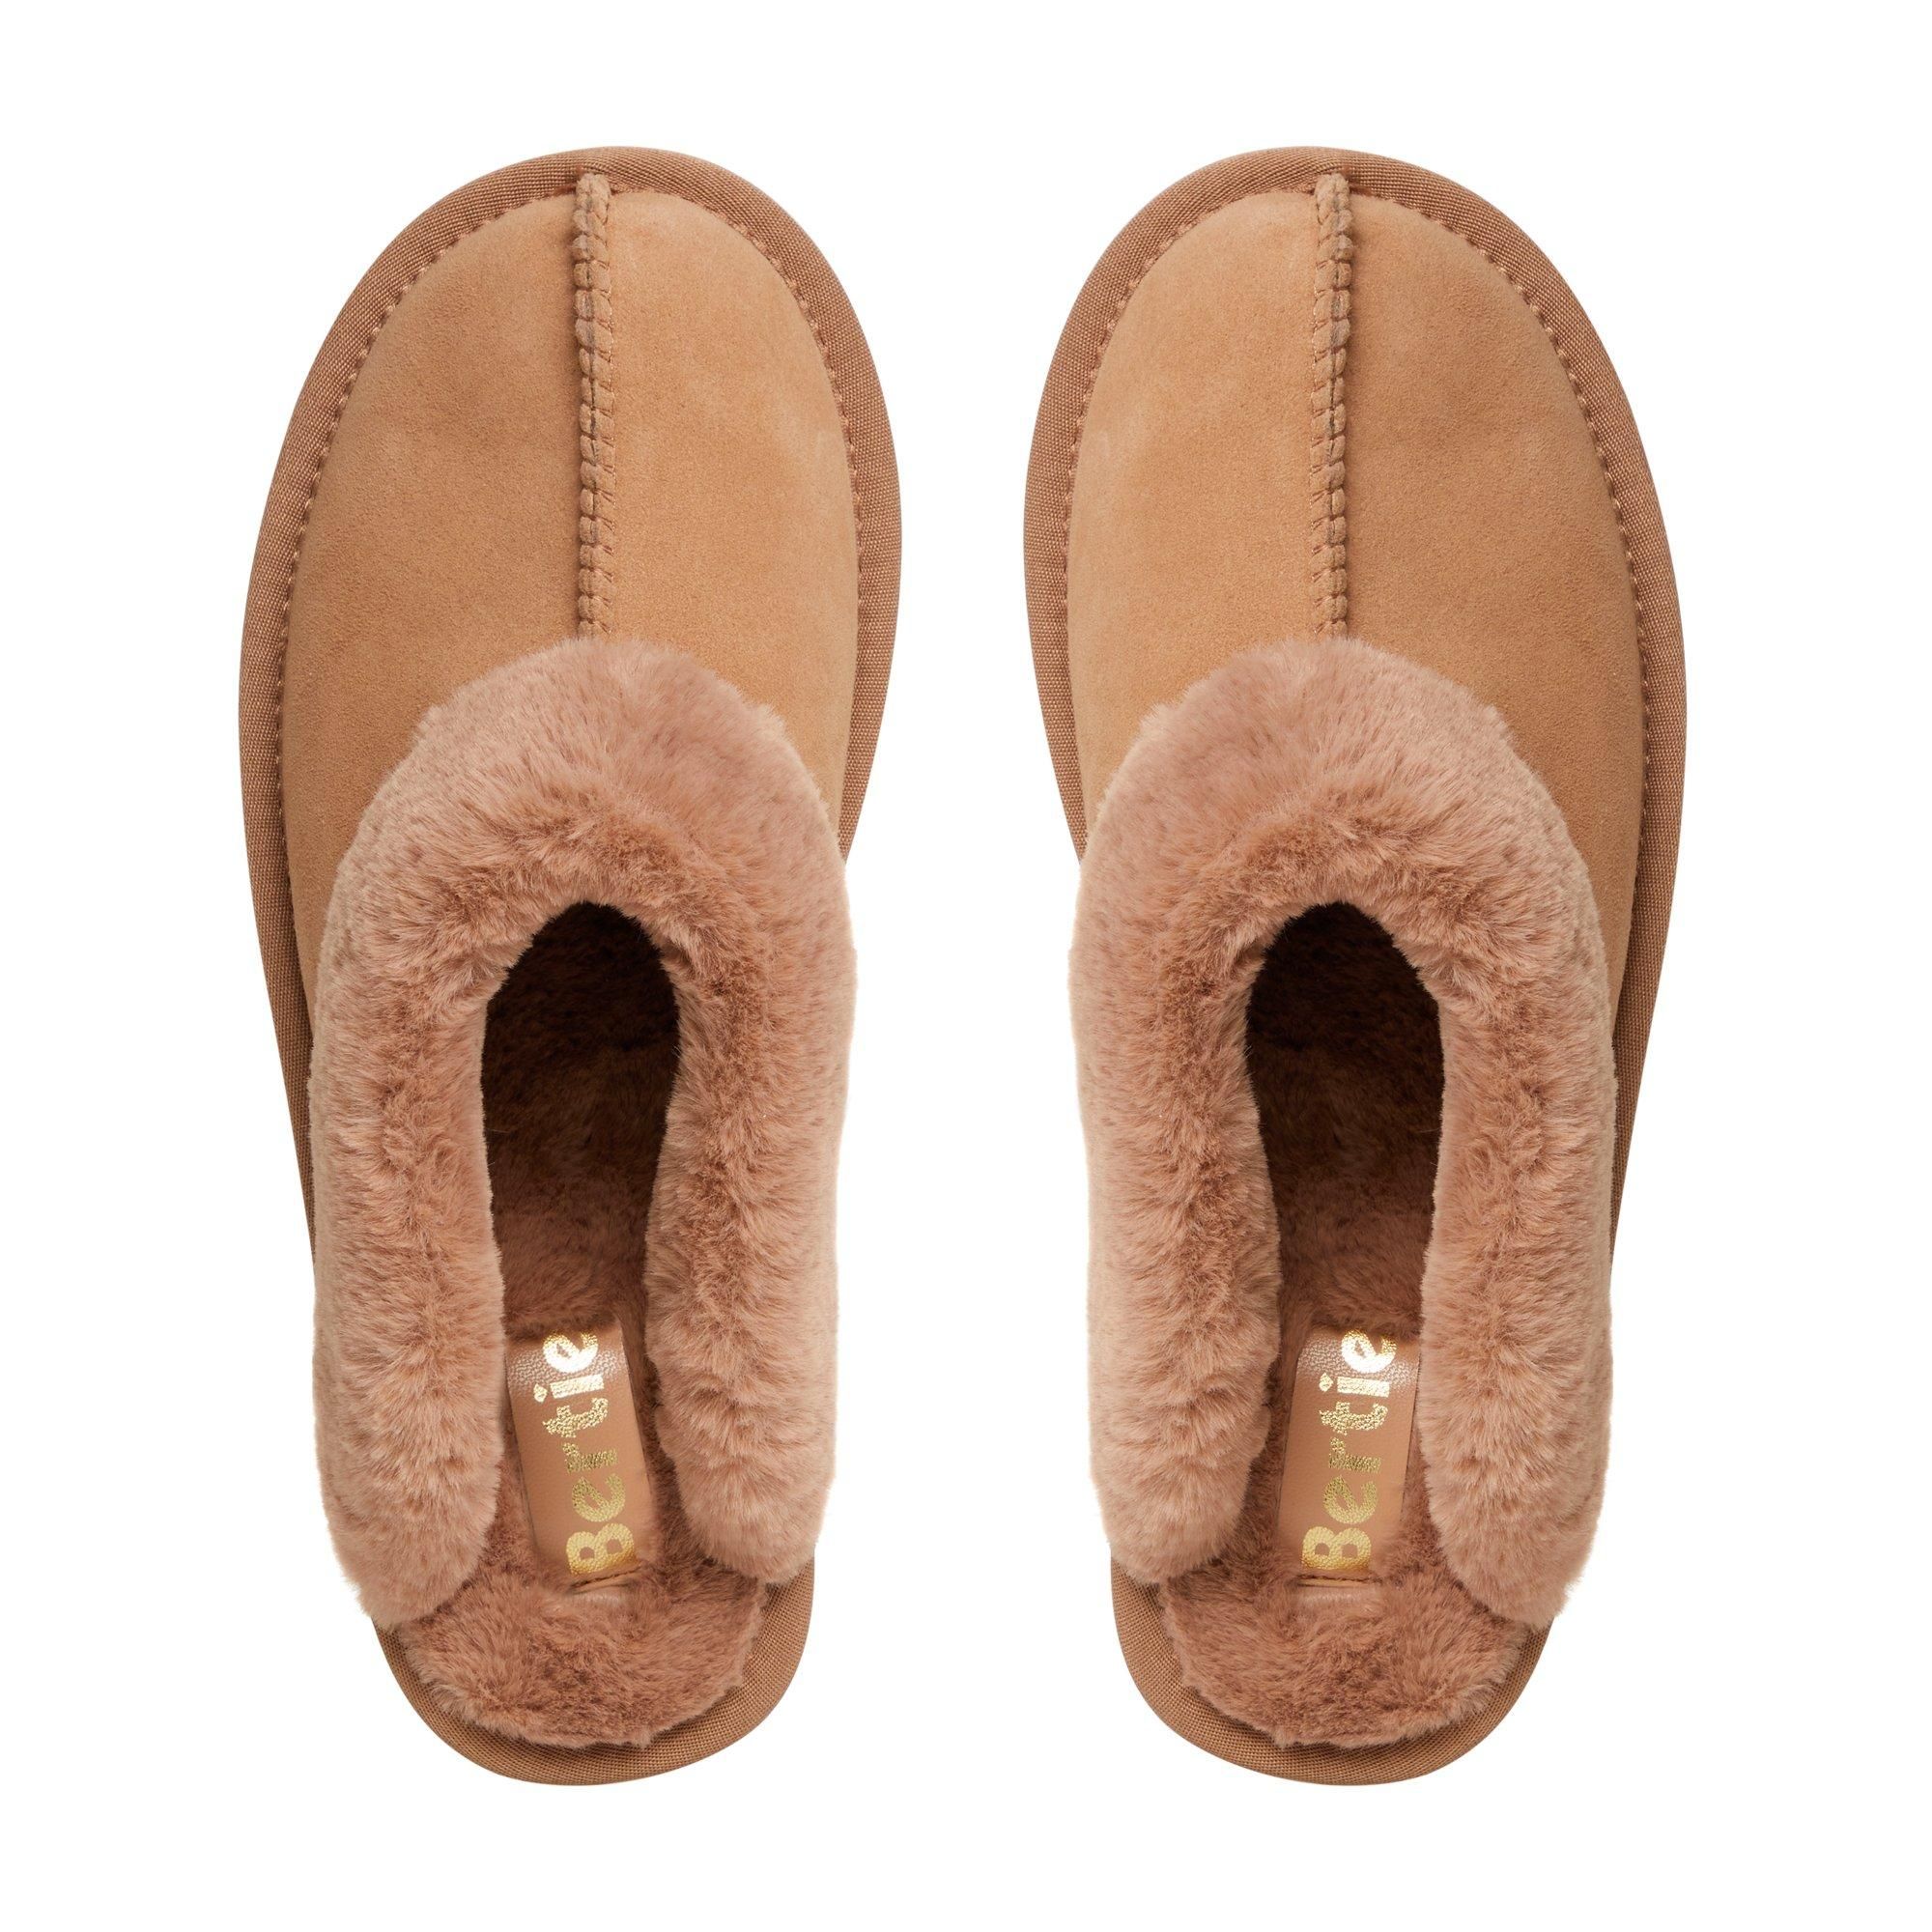 Stay comfy and cosy at home with the Walliss slippers from Bertie. Designed in an easy slip-on mule shape with a chunky sole and rounded toe. They're lined with warm and fluffy shearling.